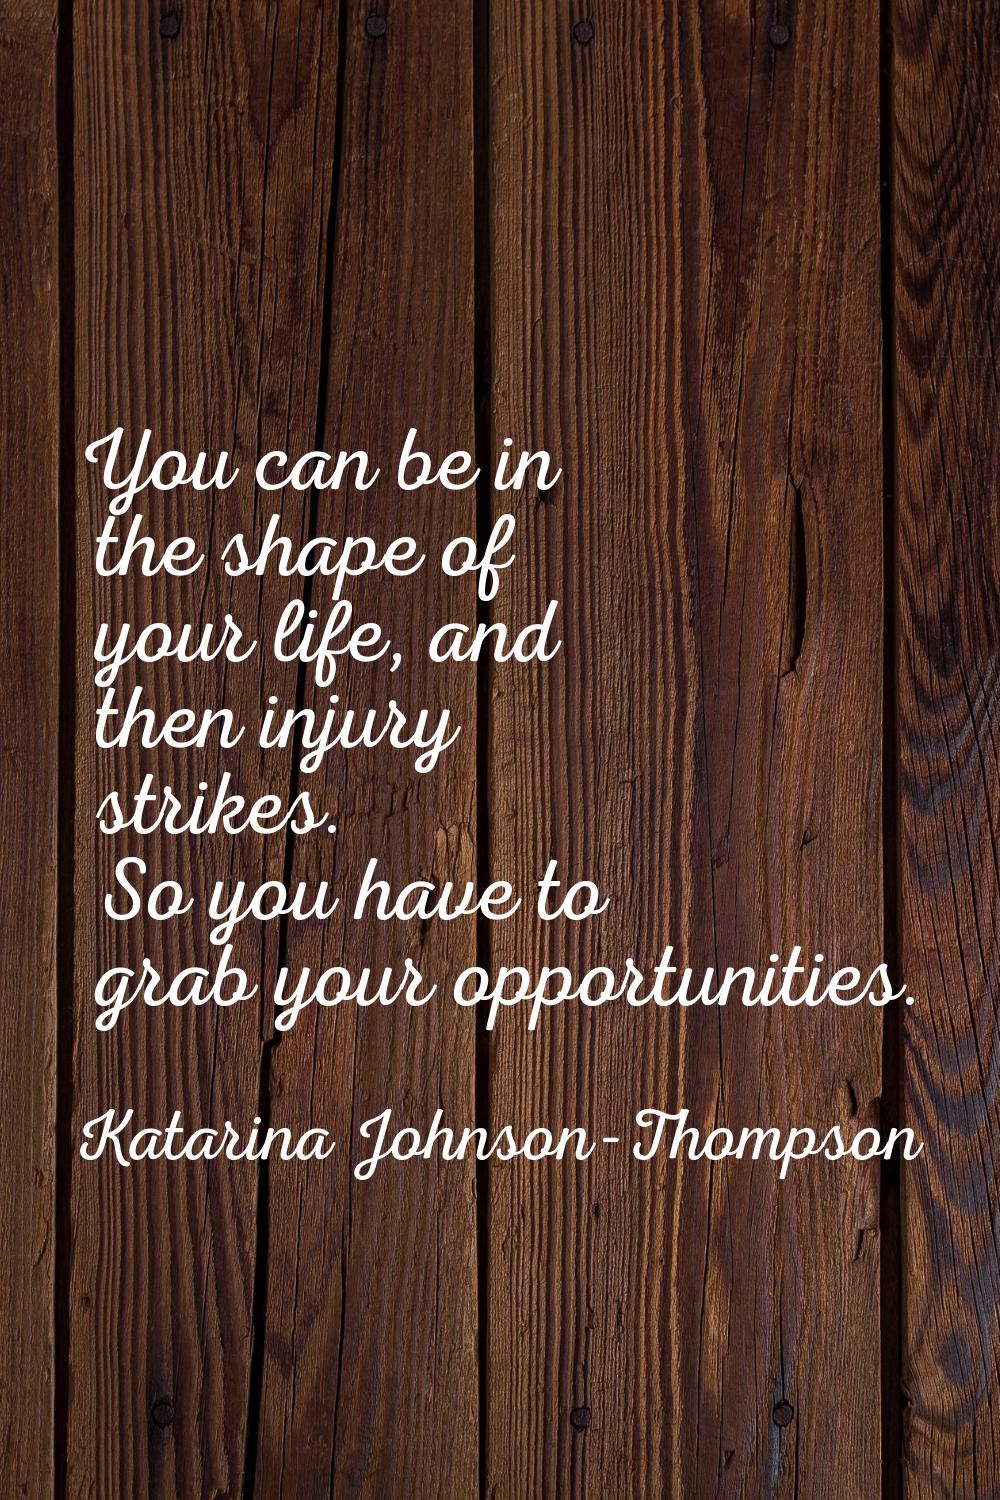 You can be in the shape of your life, and then injury strikes. So you have to grab your opportuniti